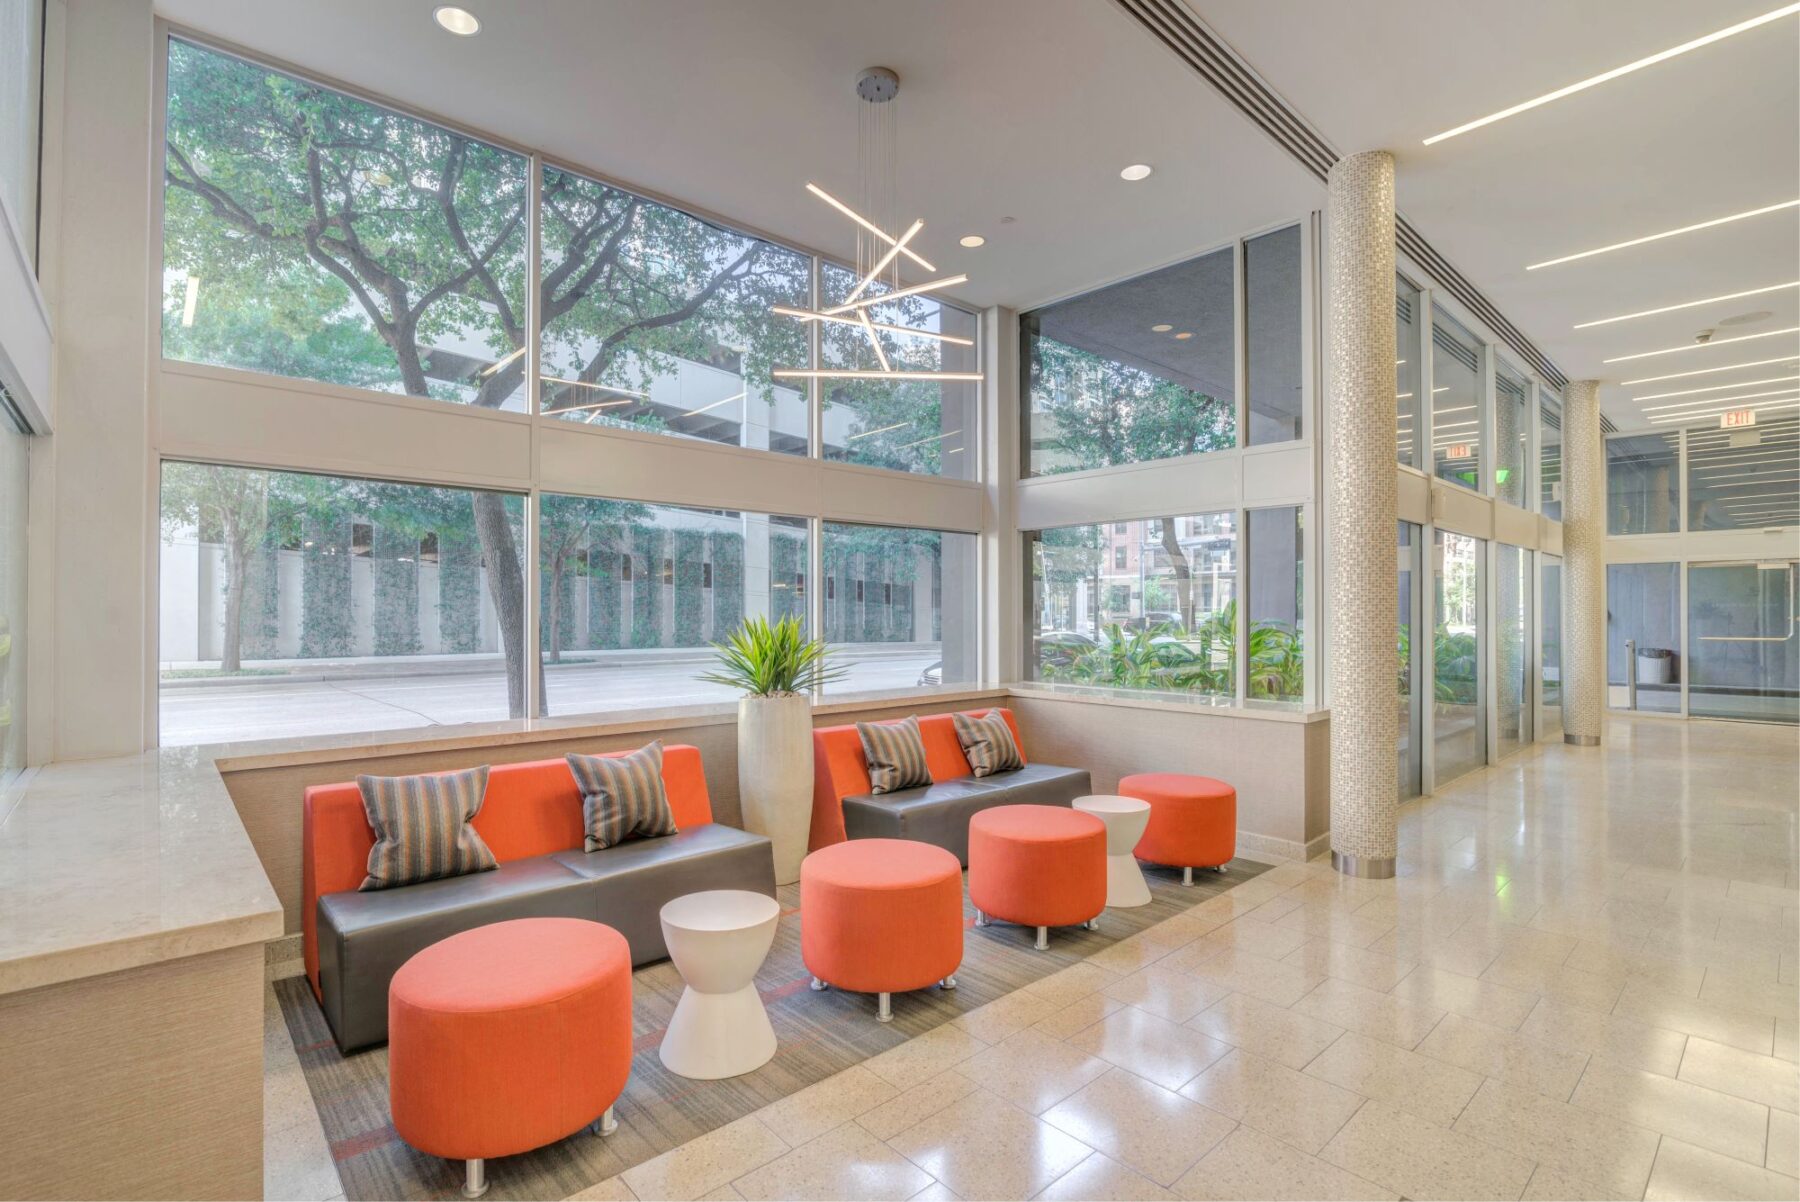 Leasing office lobby with sofas